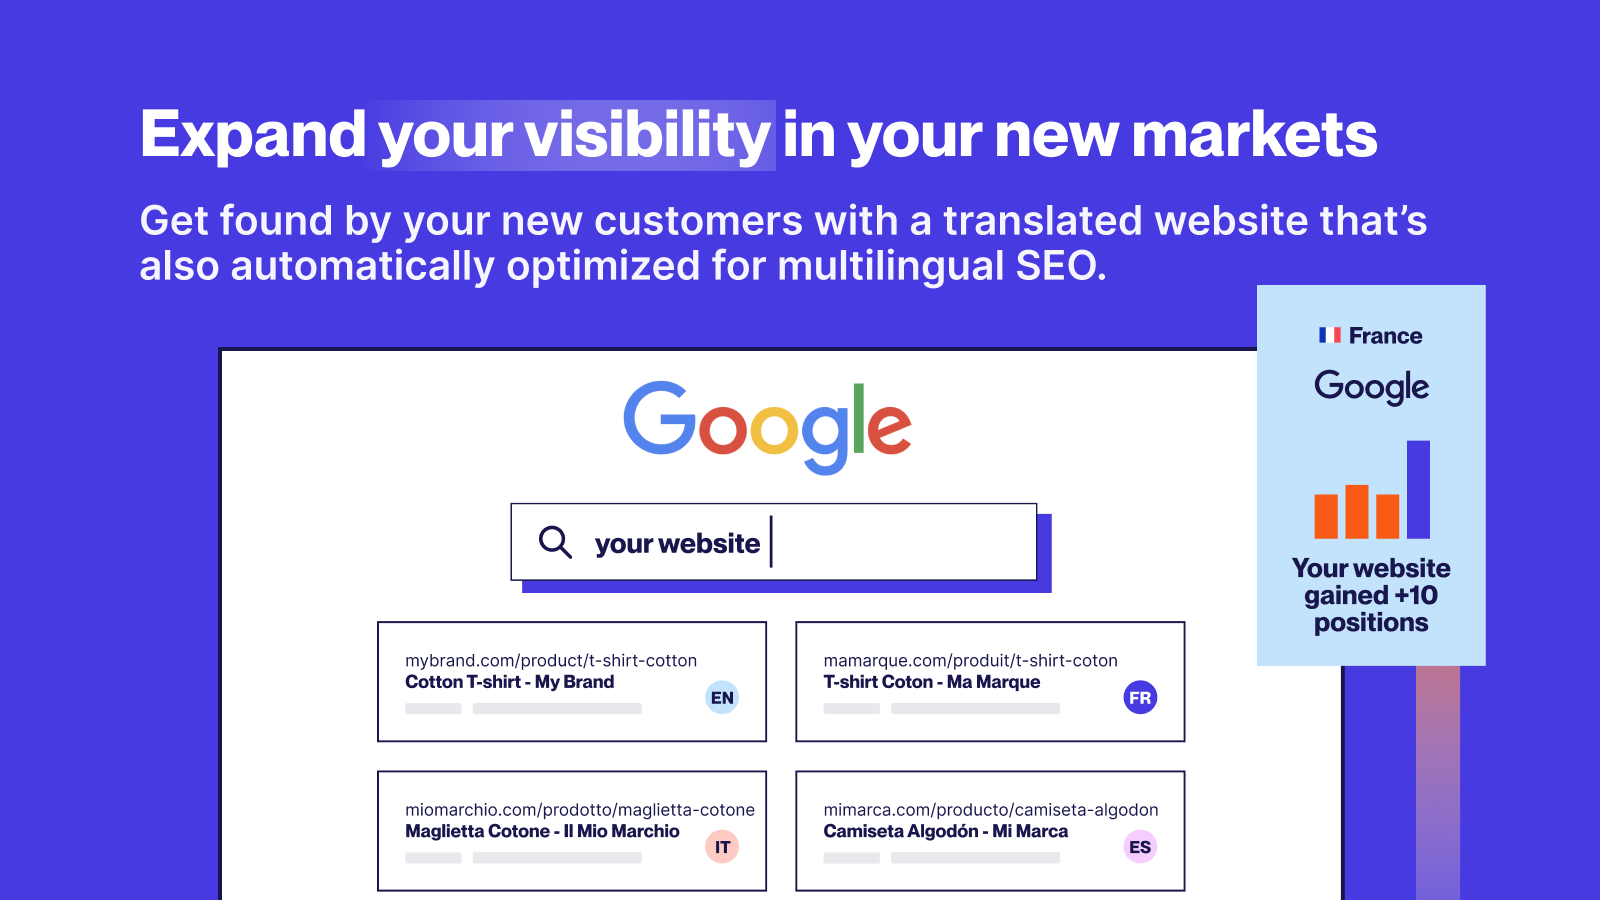 Increase your traffic with a multilingual SEO pptimized website